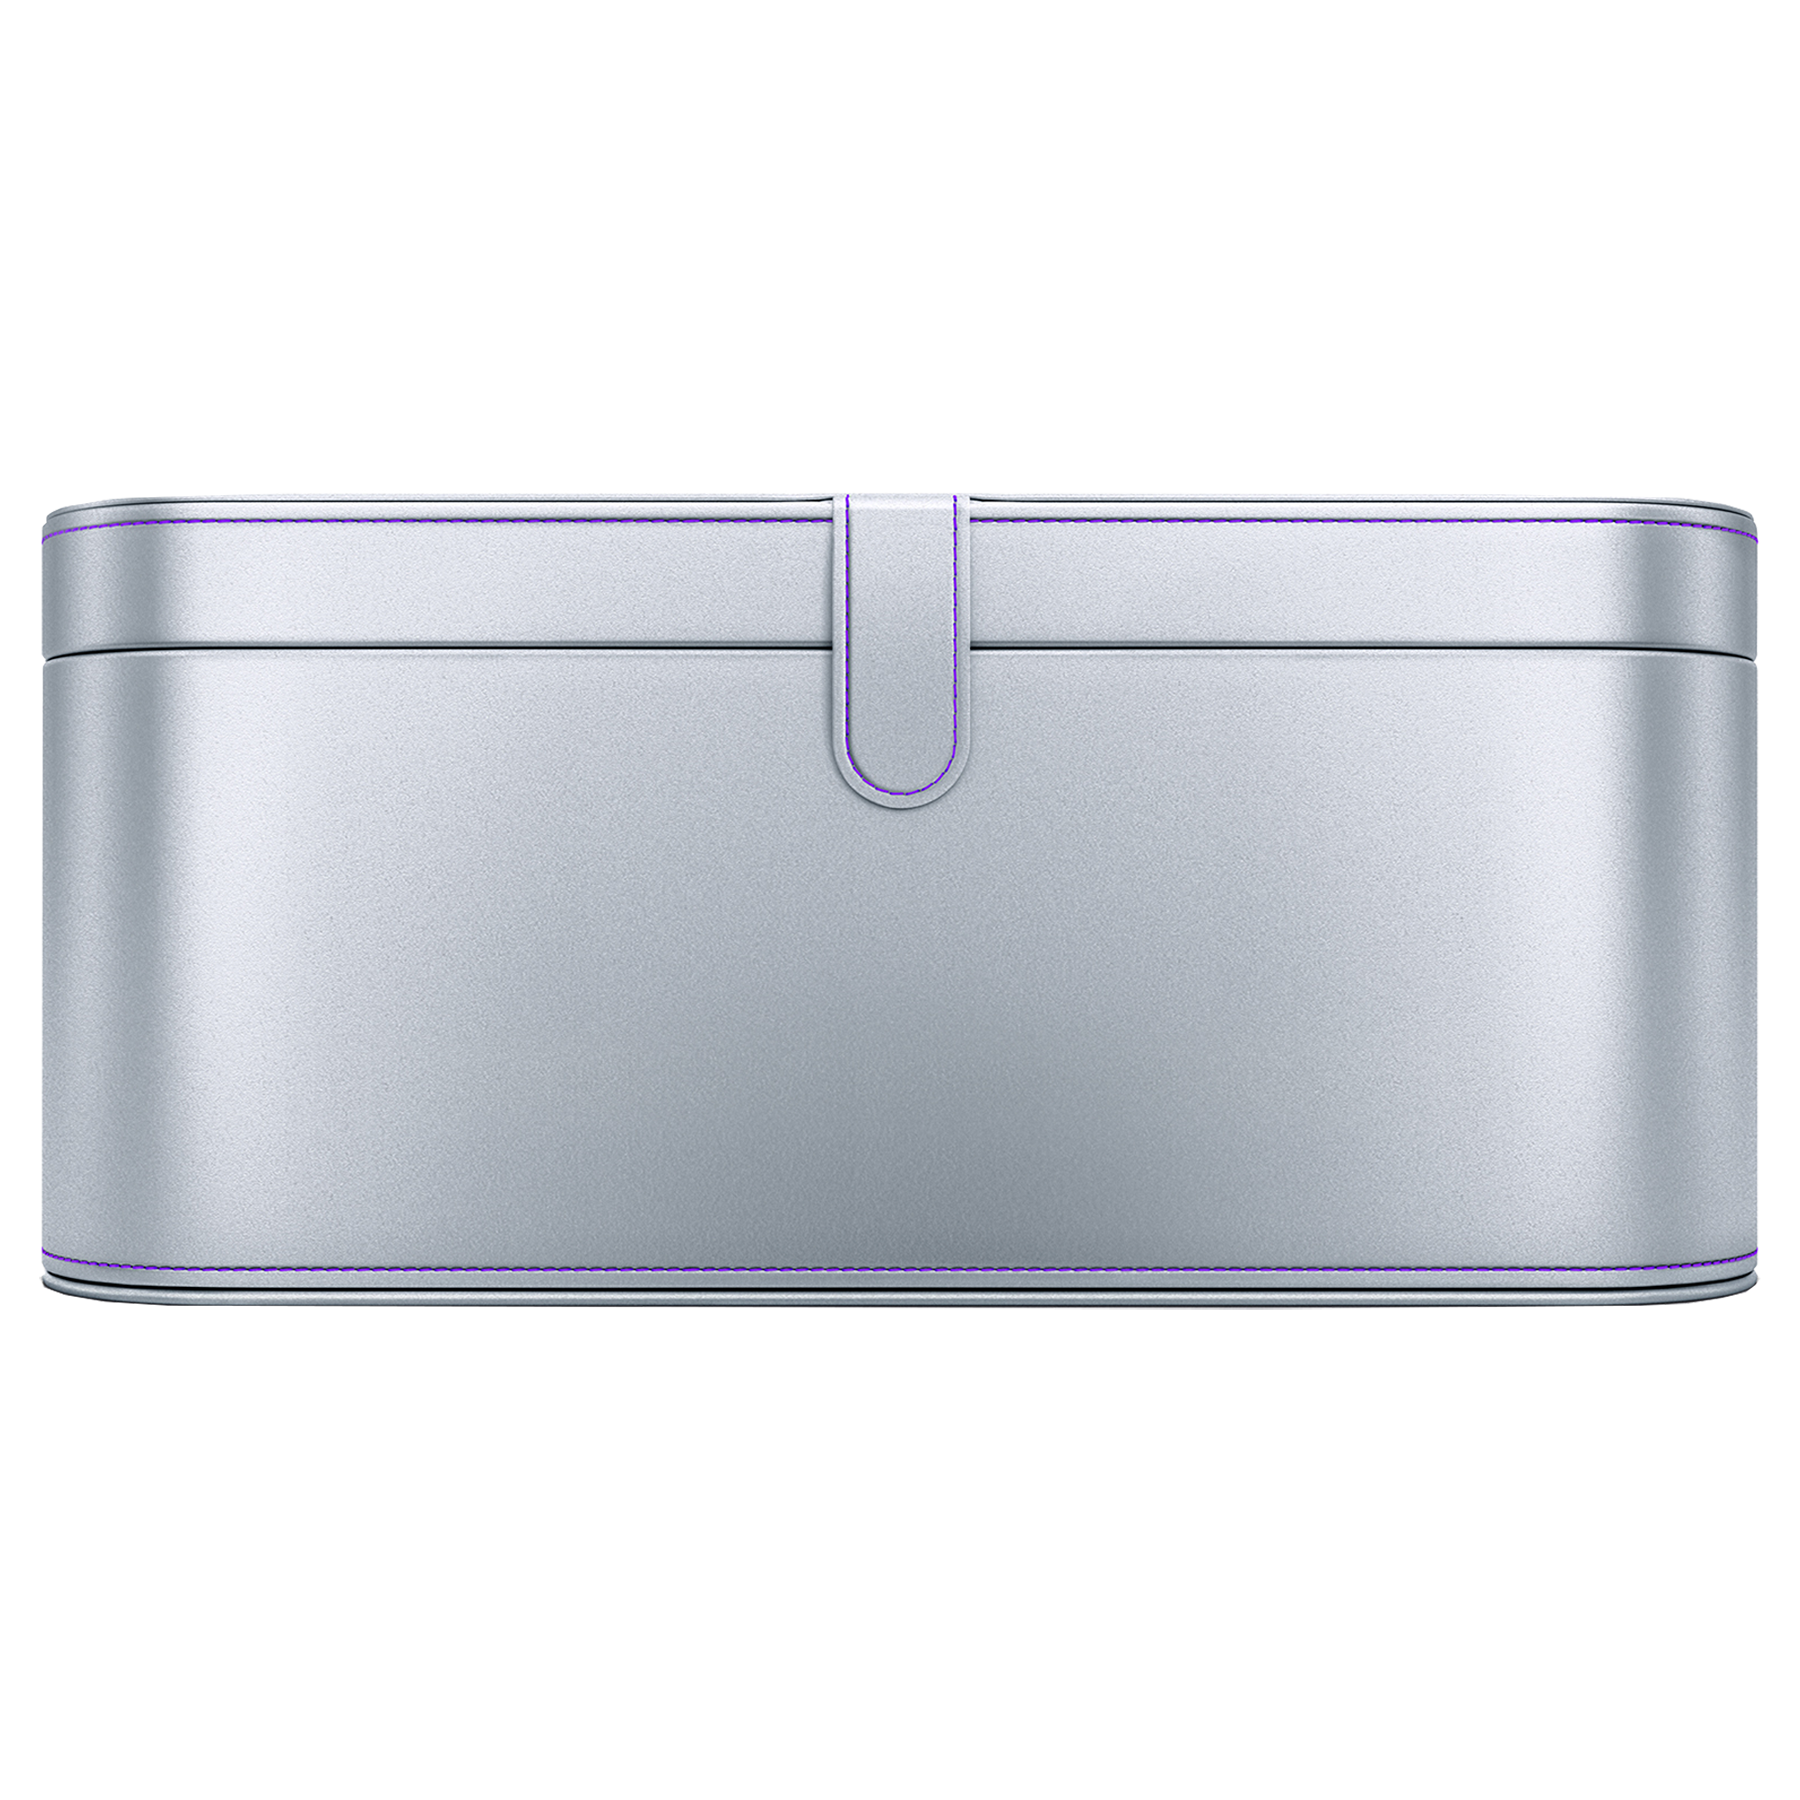 Dyson Supersonic Presentation Case For Hair Dryer (968683-04, Silver)